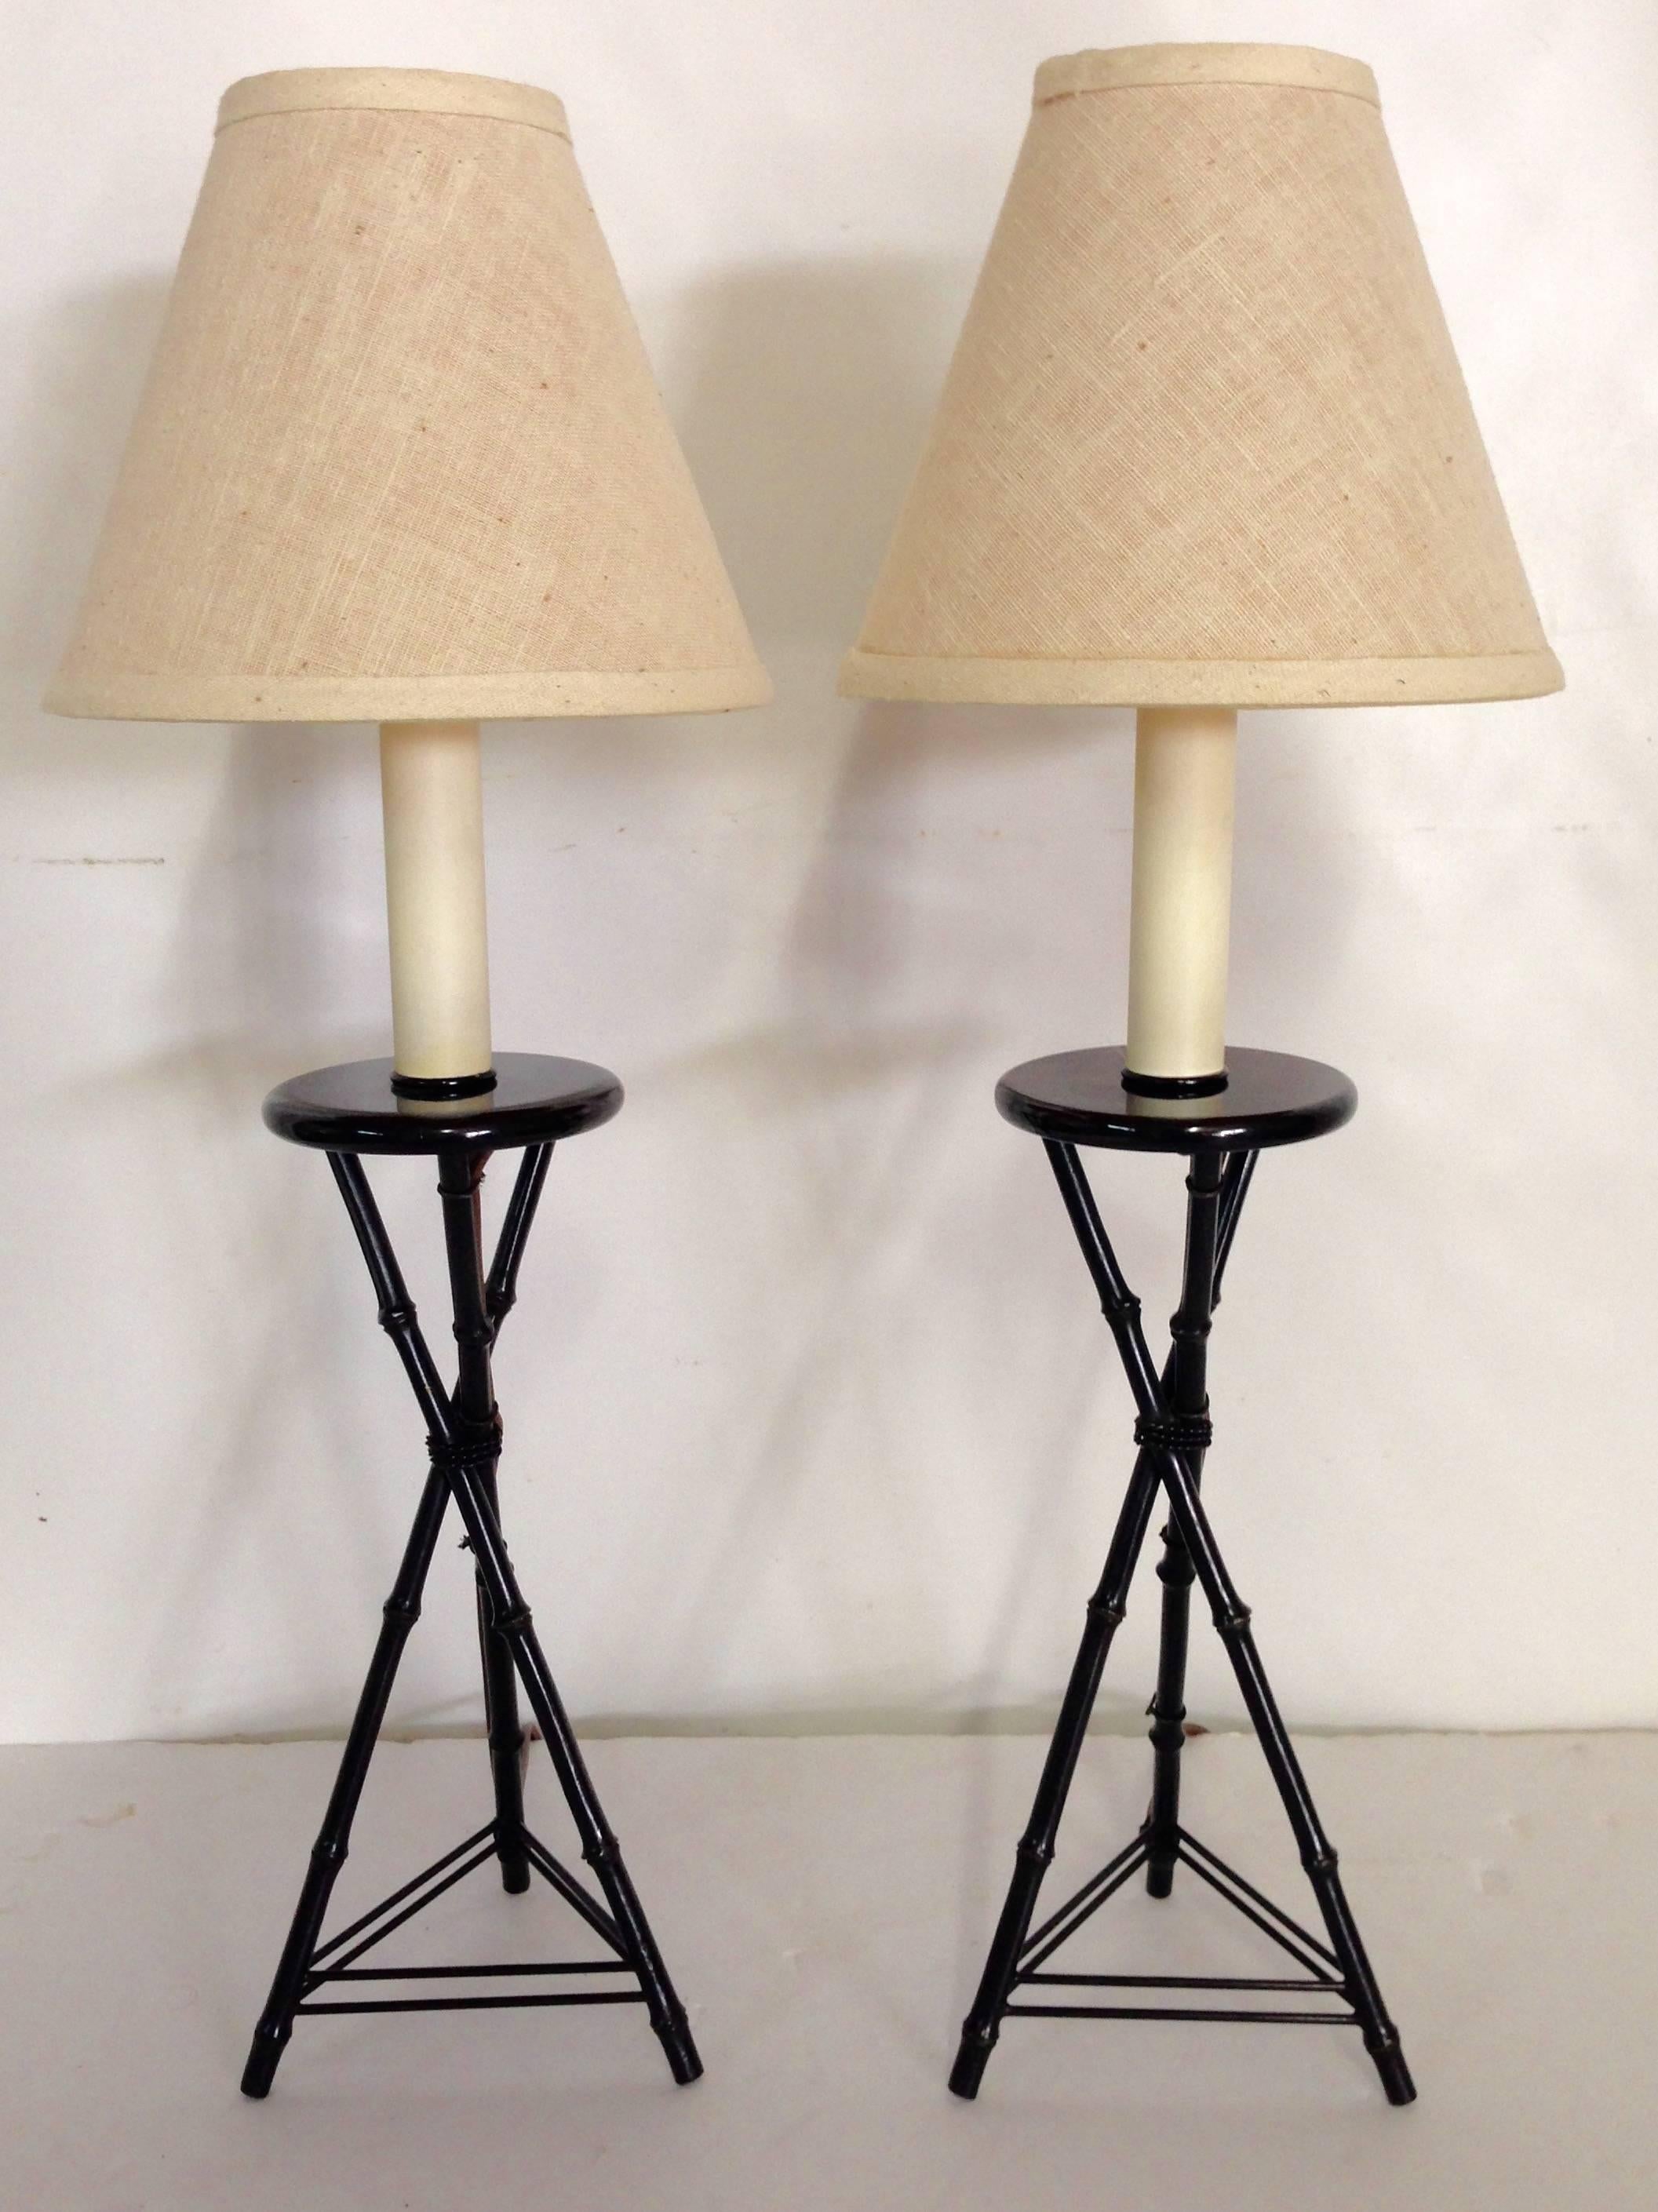 Frederick Cooper tripod bamboo-style table lamps with shades. Tripod bases are a high-gloss black finish and made of metal. Wired for the US and in working order. Original natural-colored linen shades, 6